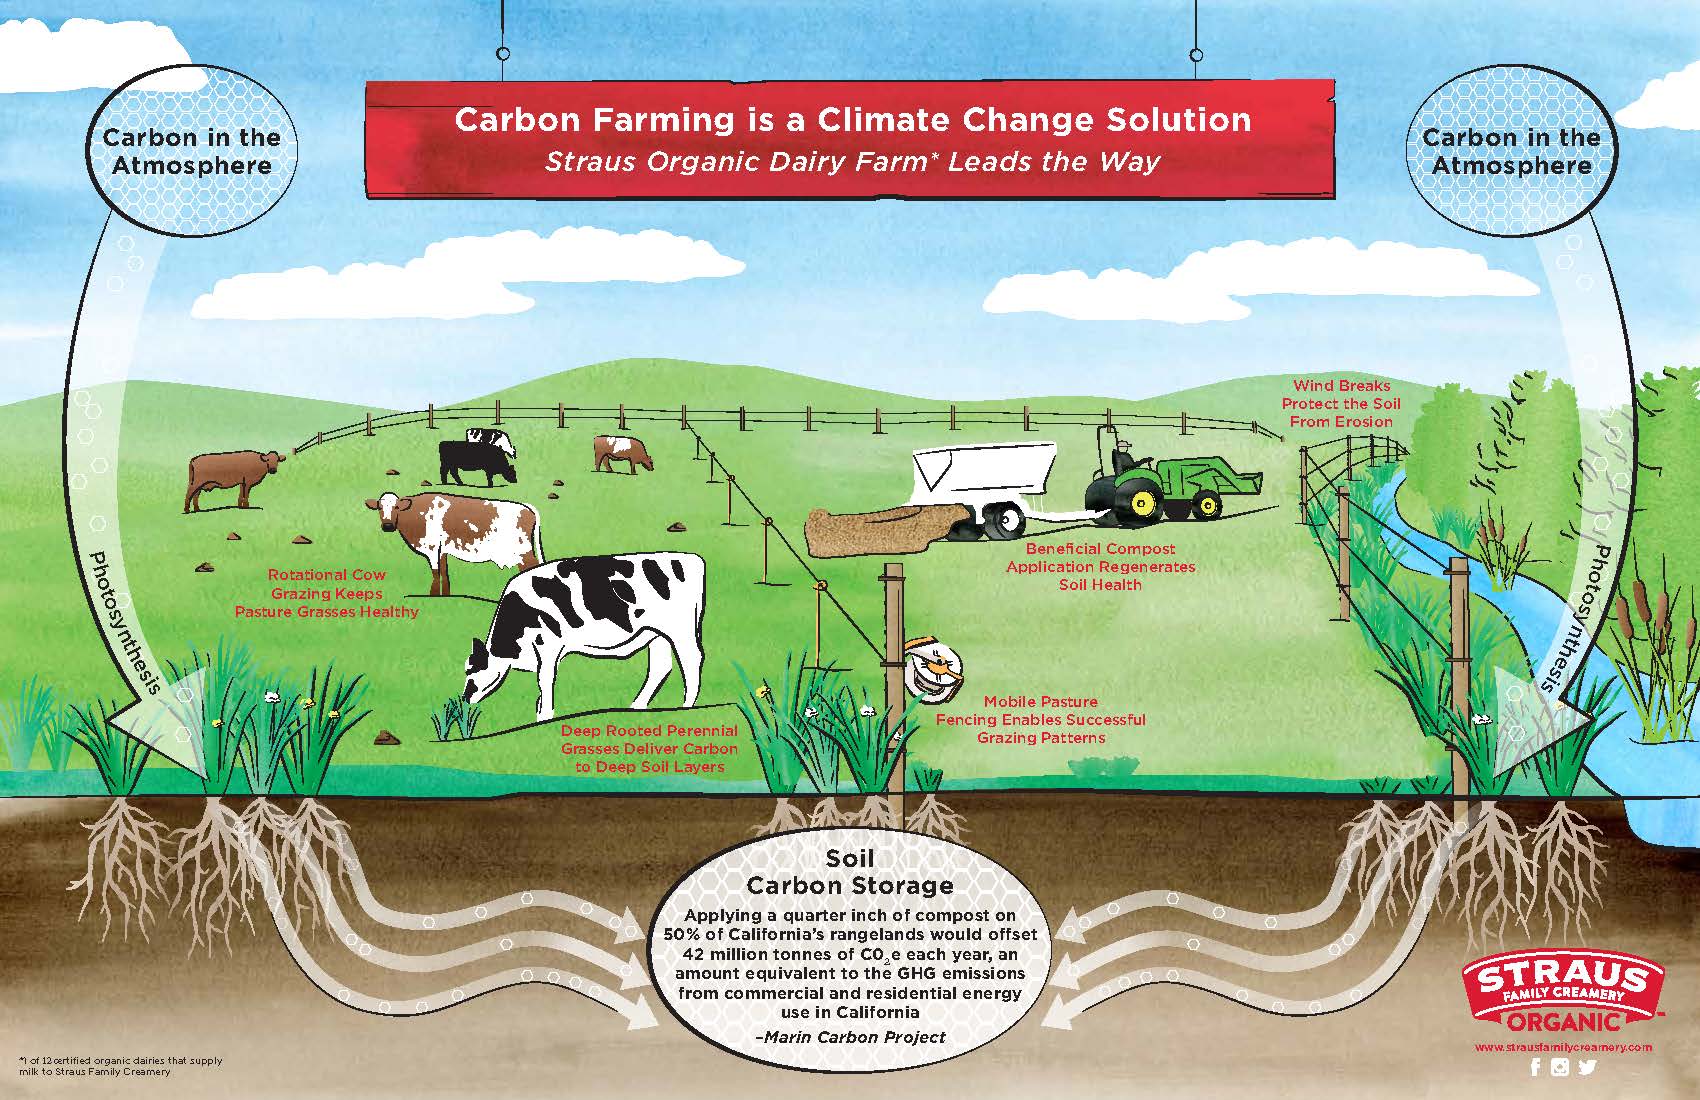 carbon farming is a climate change solution. straus organic dairy farm leads the way